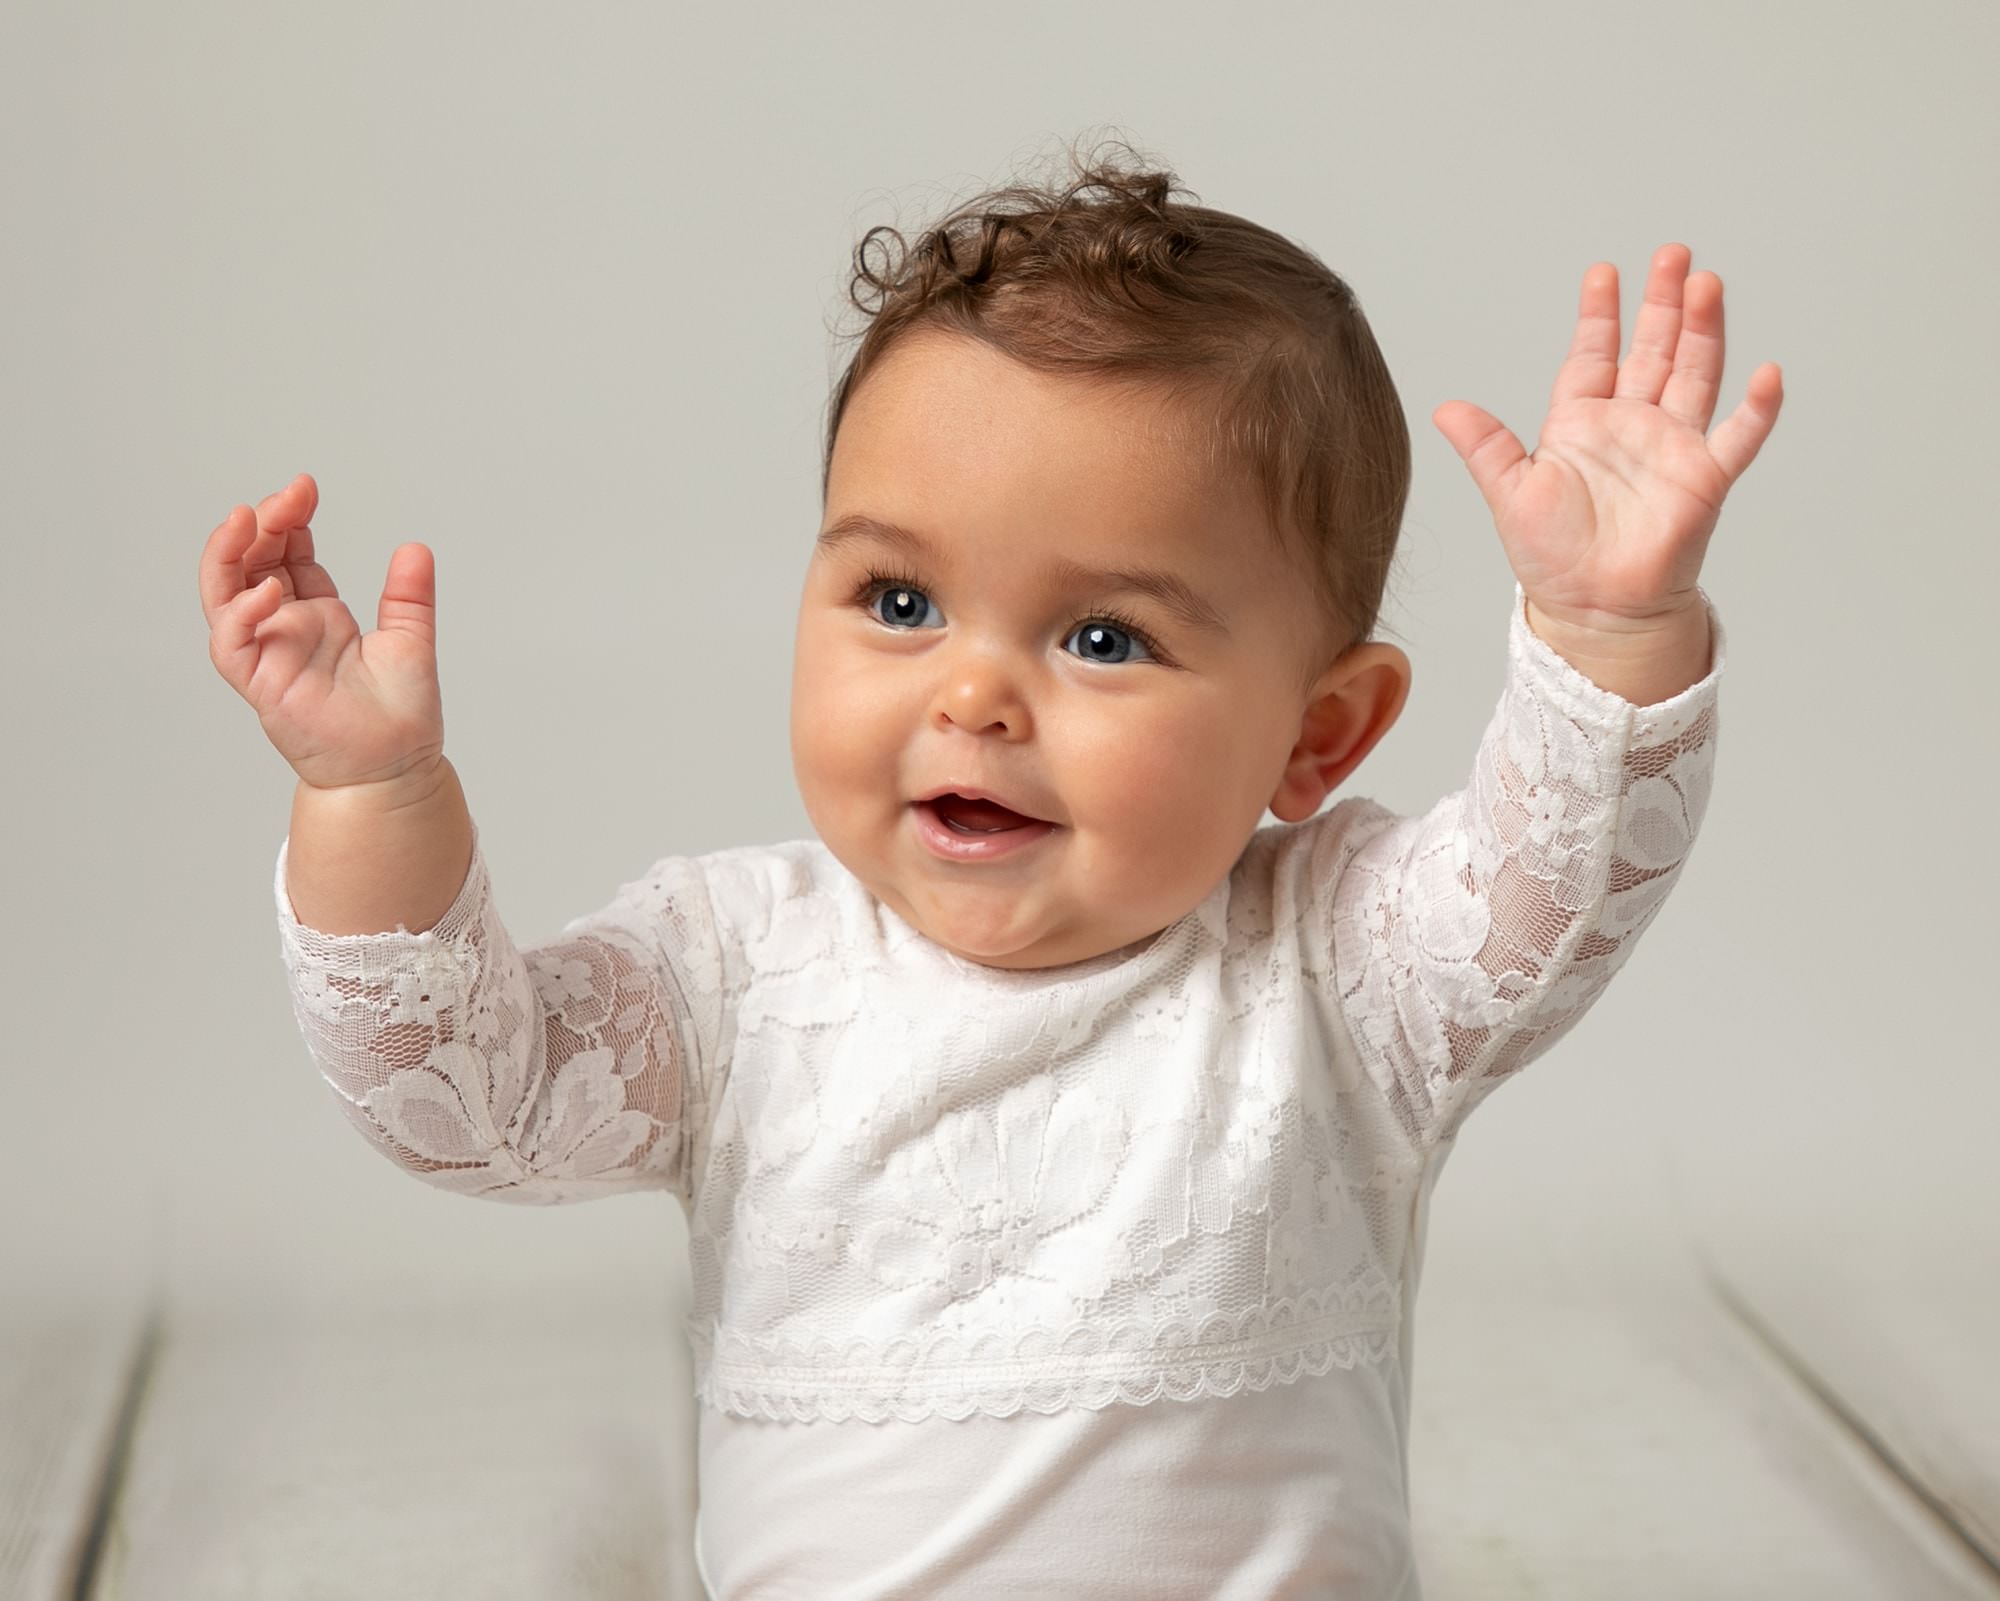 Baby girl with short curls wearing a white romper during a baby photography session in Glasgow. Baby is smiling and holding her hands in the air